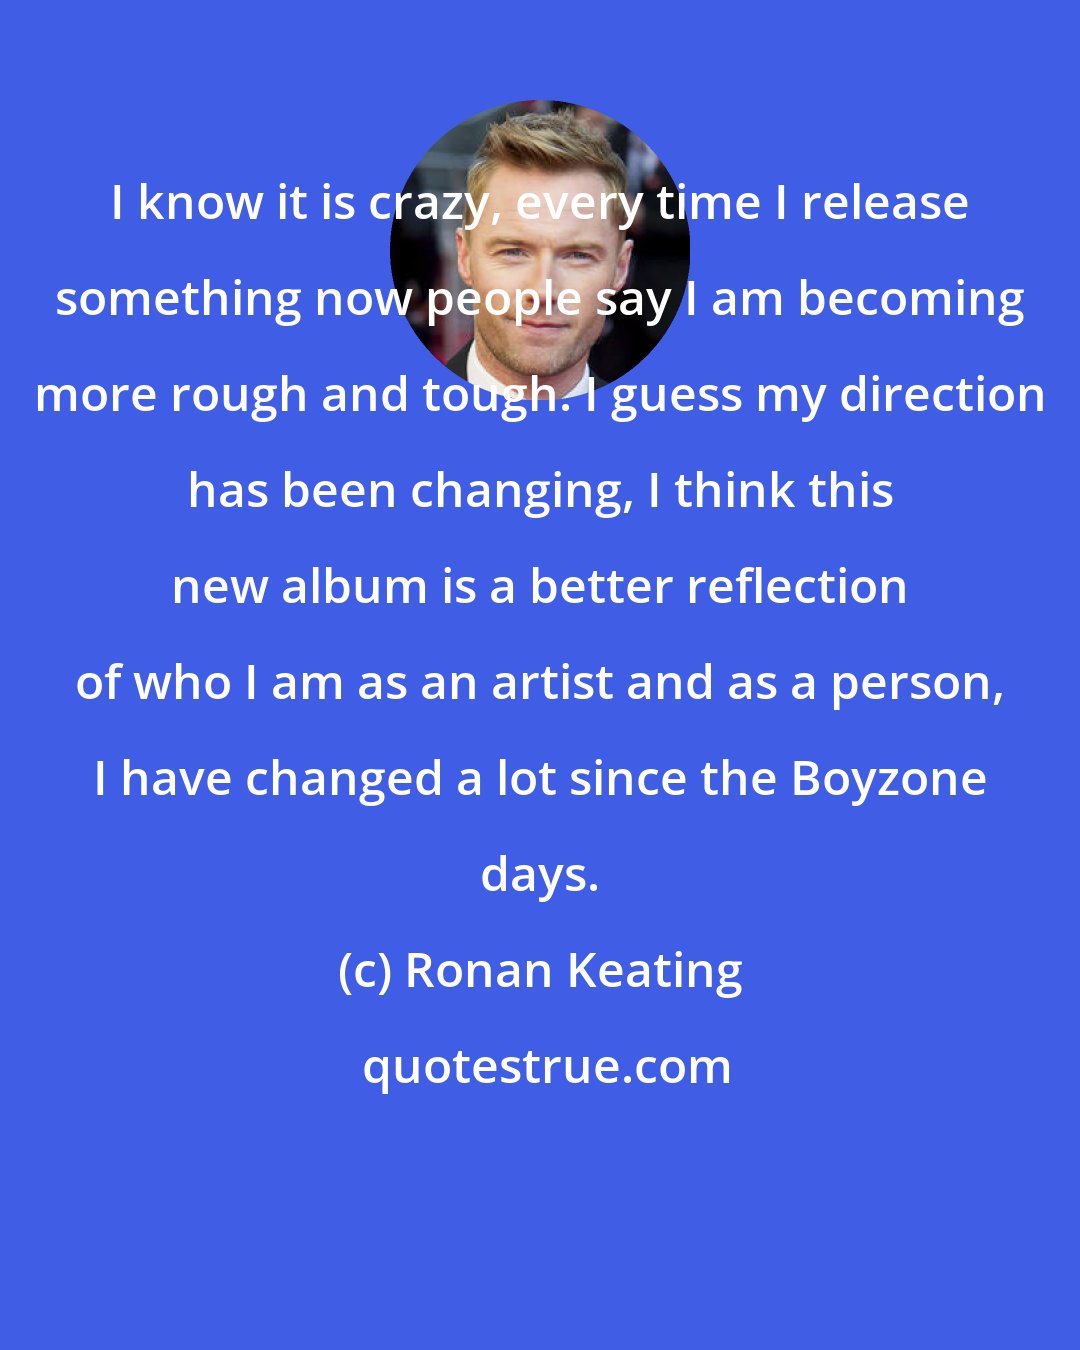 Ronan Keating: I know it is crazy, every time I release something now people say I am becoming more rough and tough. I guess my direction has been changing, I think this new album is a better reflection of who I am as an artist and as a person, I have changed a lot since the Boyzone days.